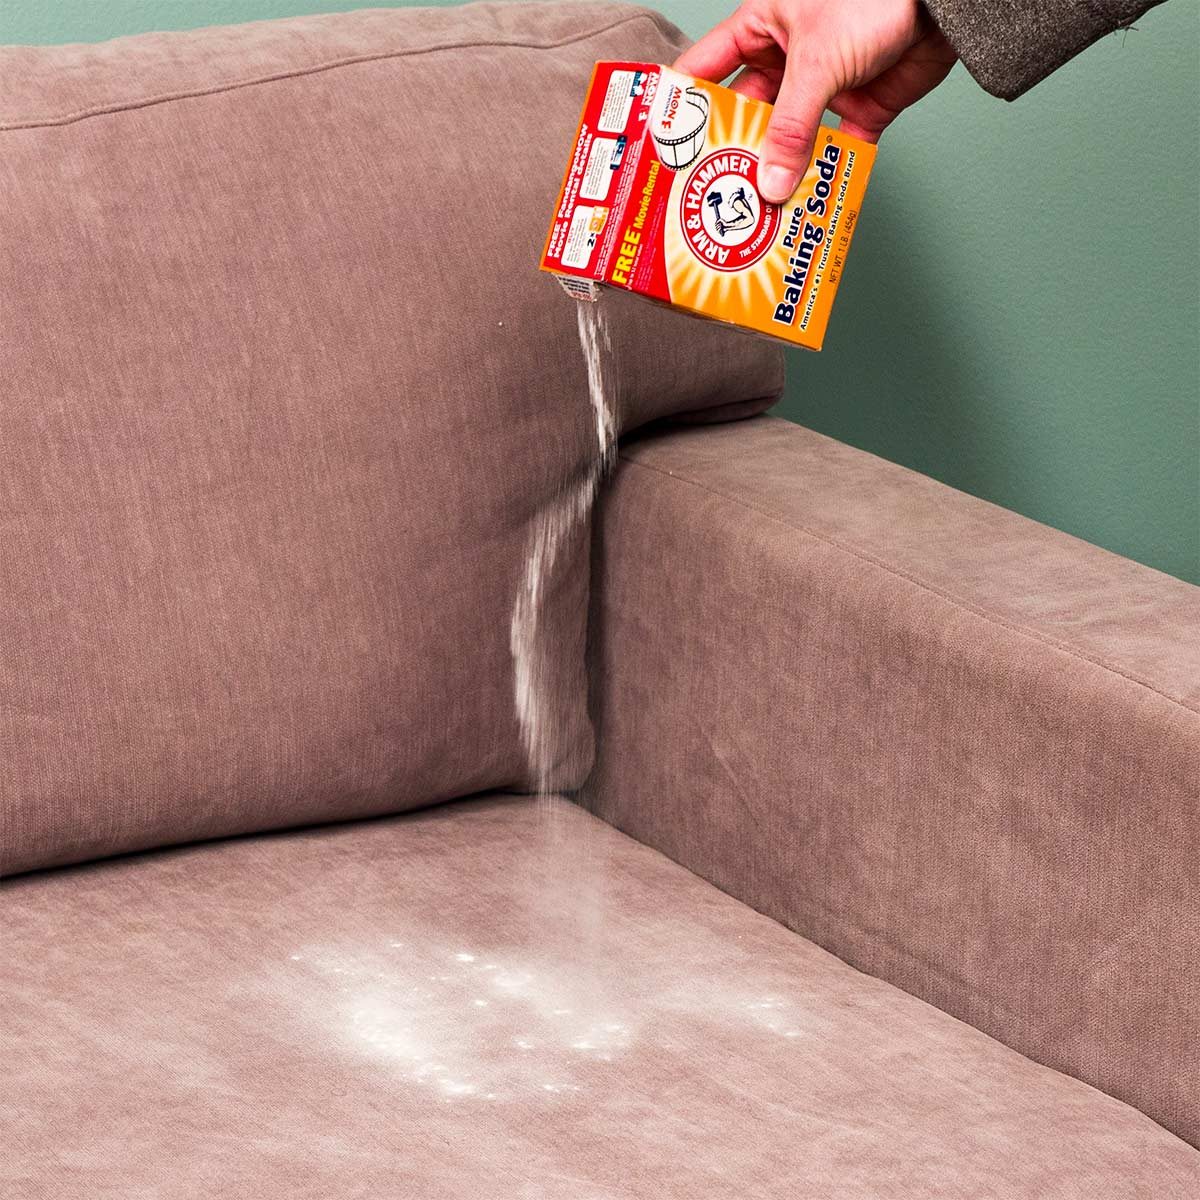 Clean Upholstery With Baking Soda